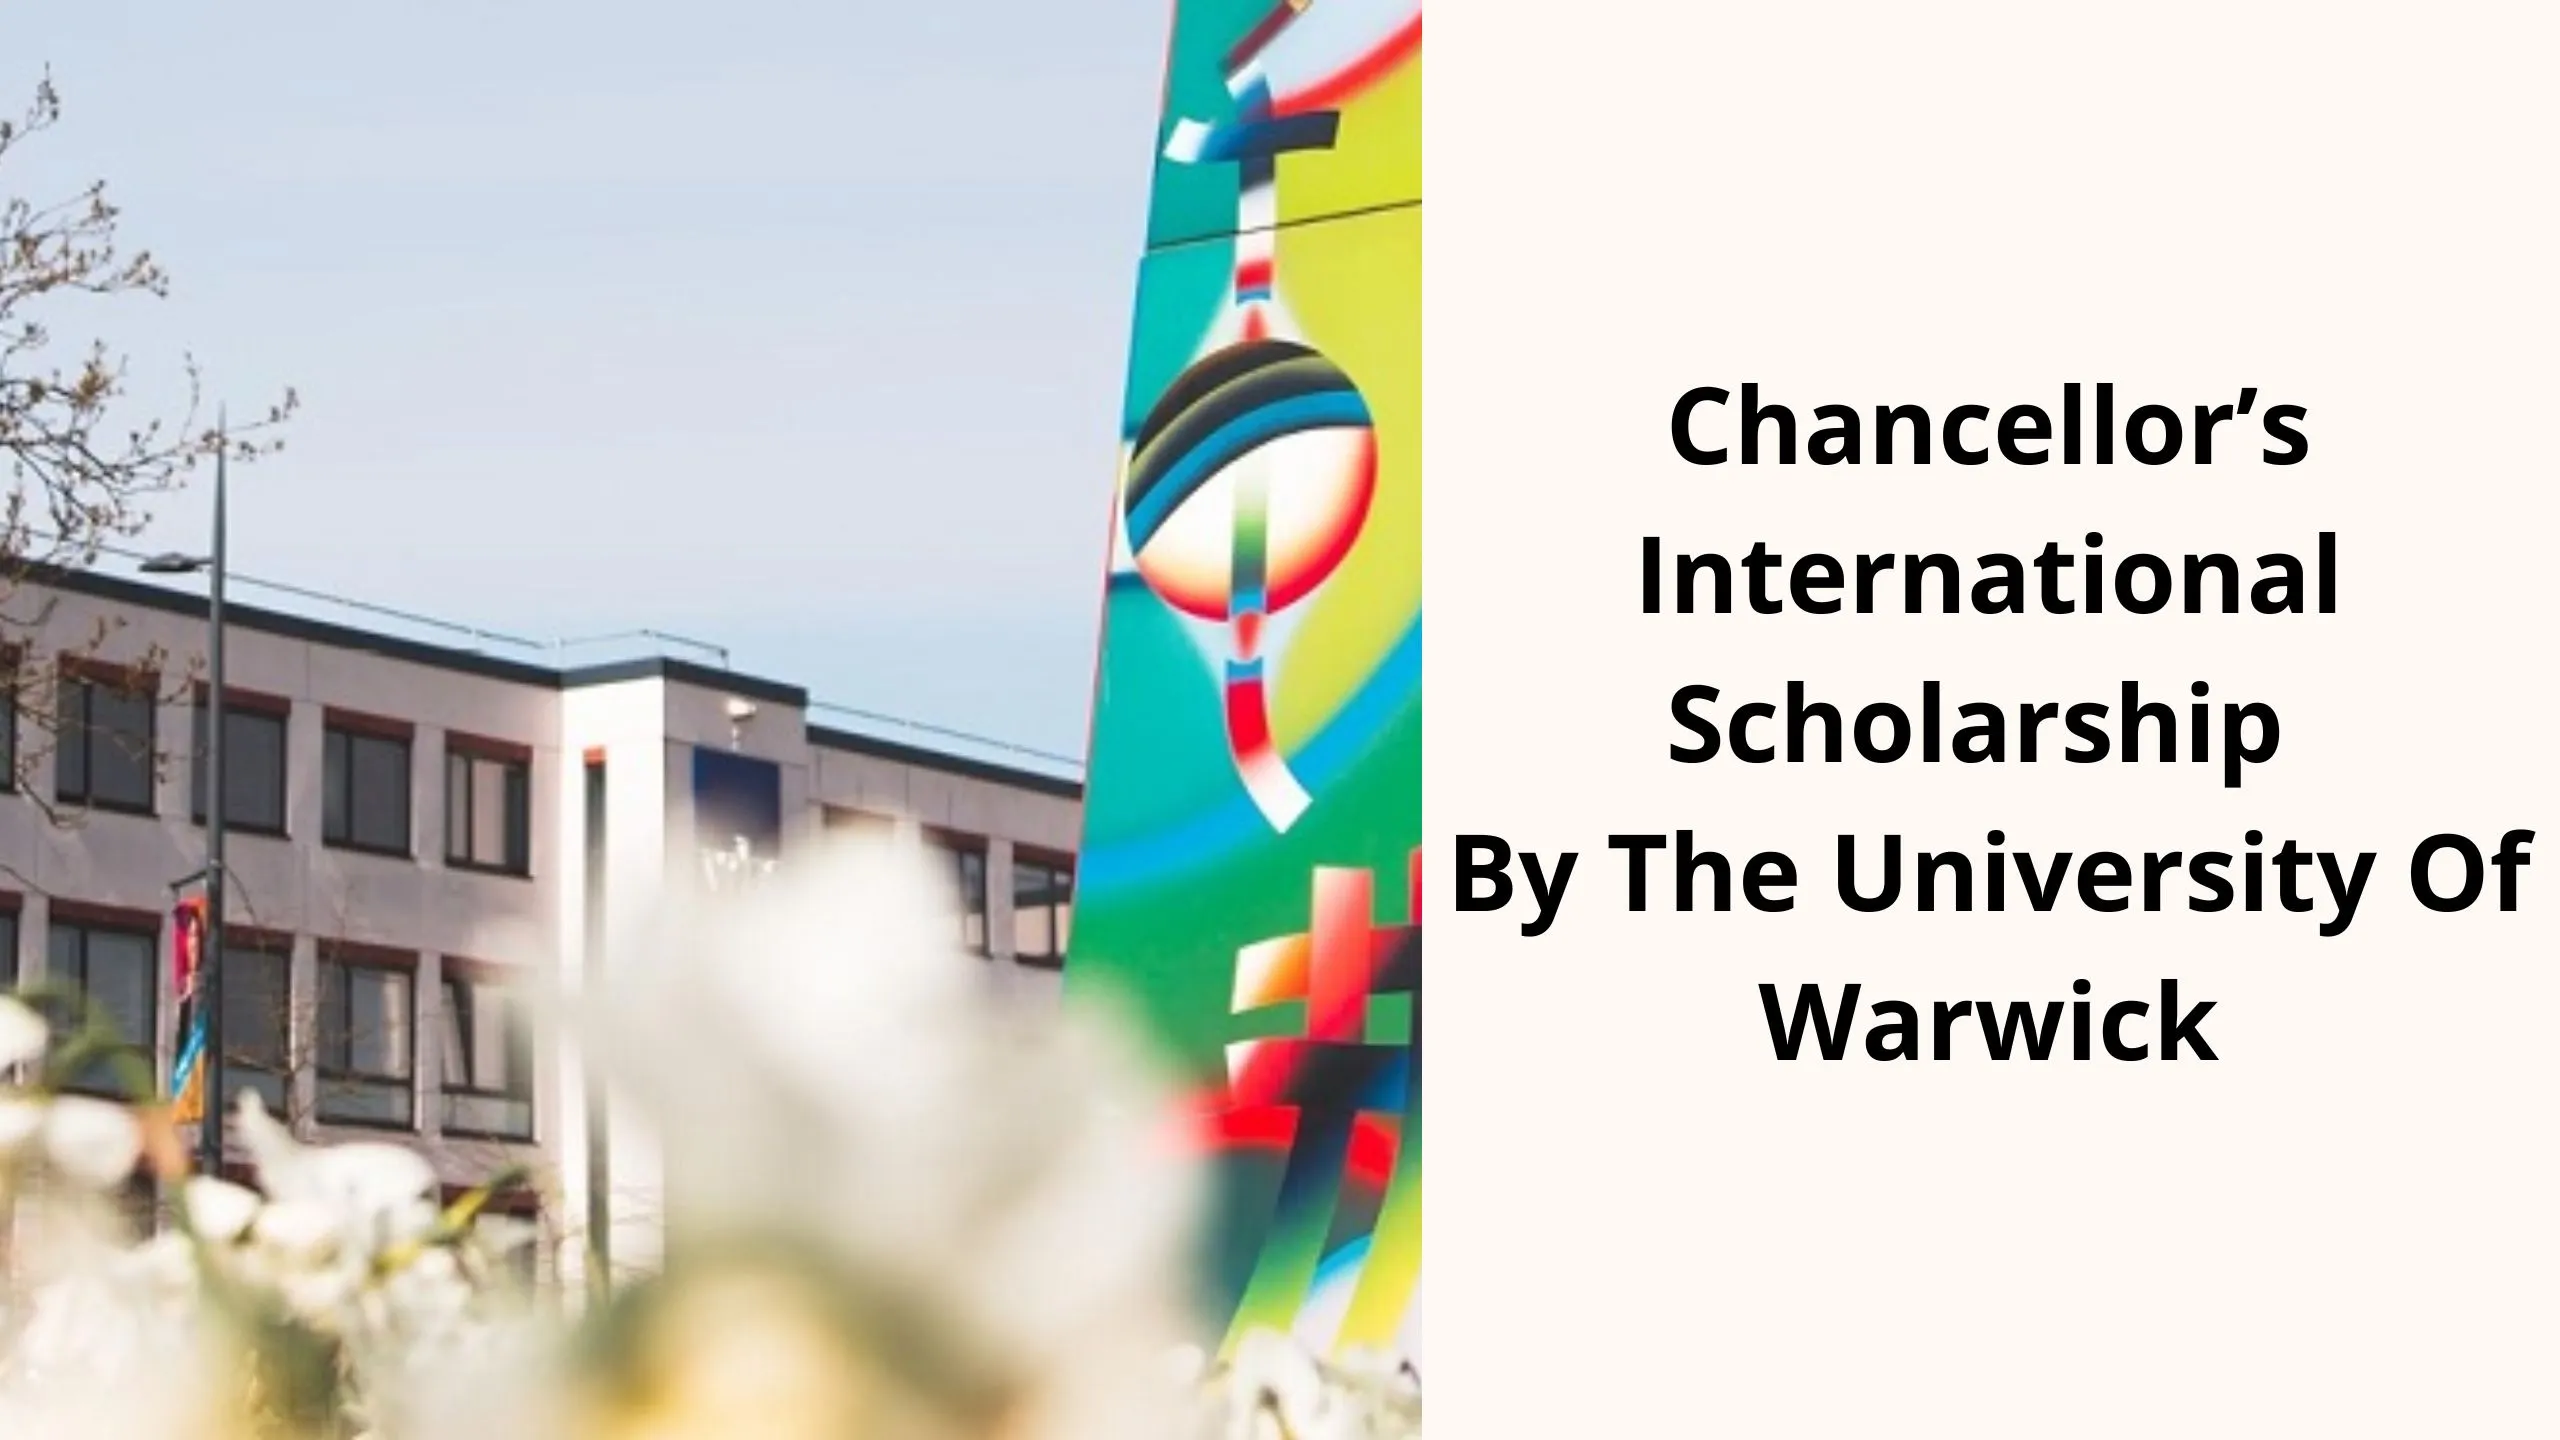 Chancellor’s International Scholarship By The University Of Warwick